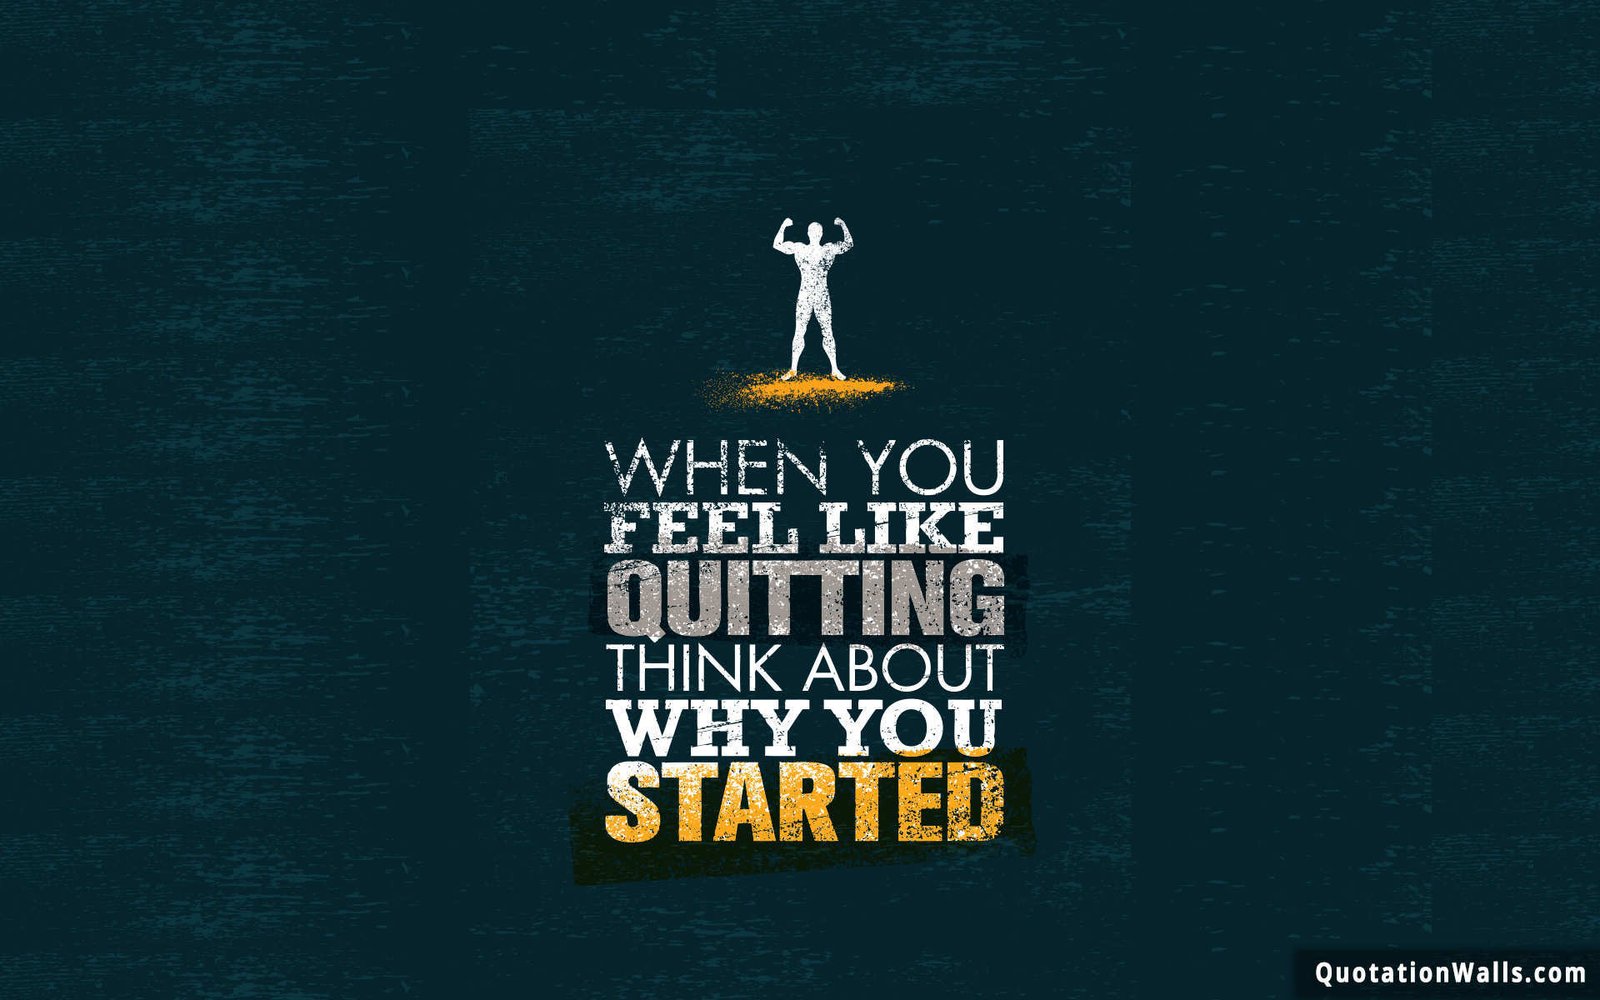 Motivation Wallpaper: Mobile wallpapers with sayings and ...